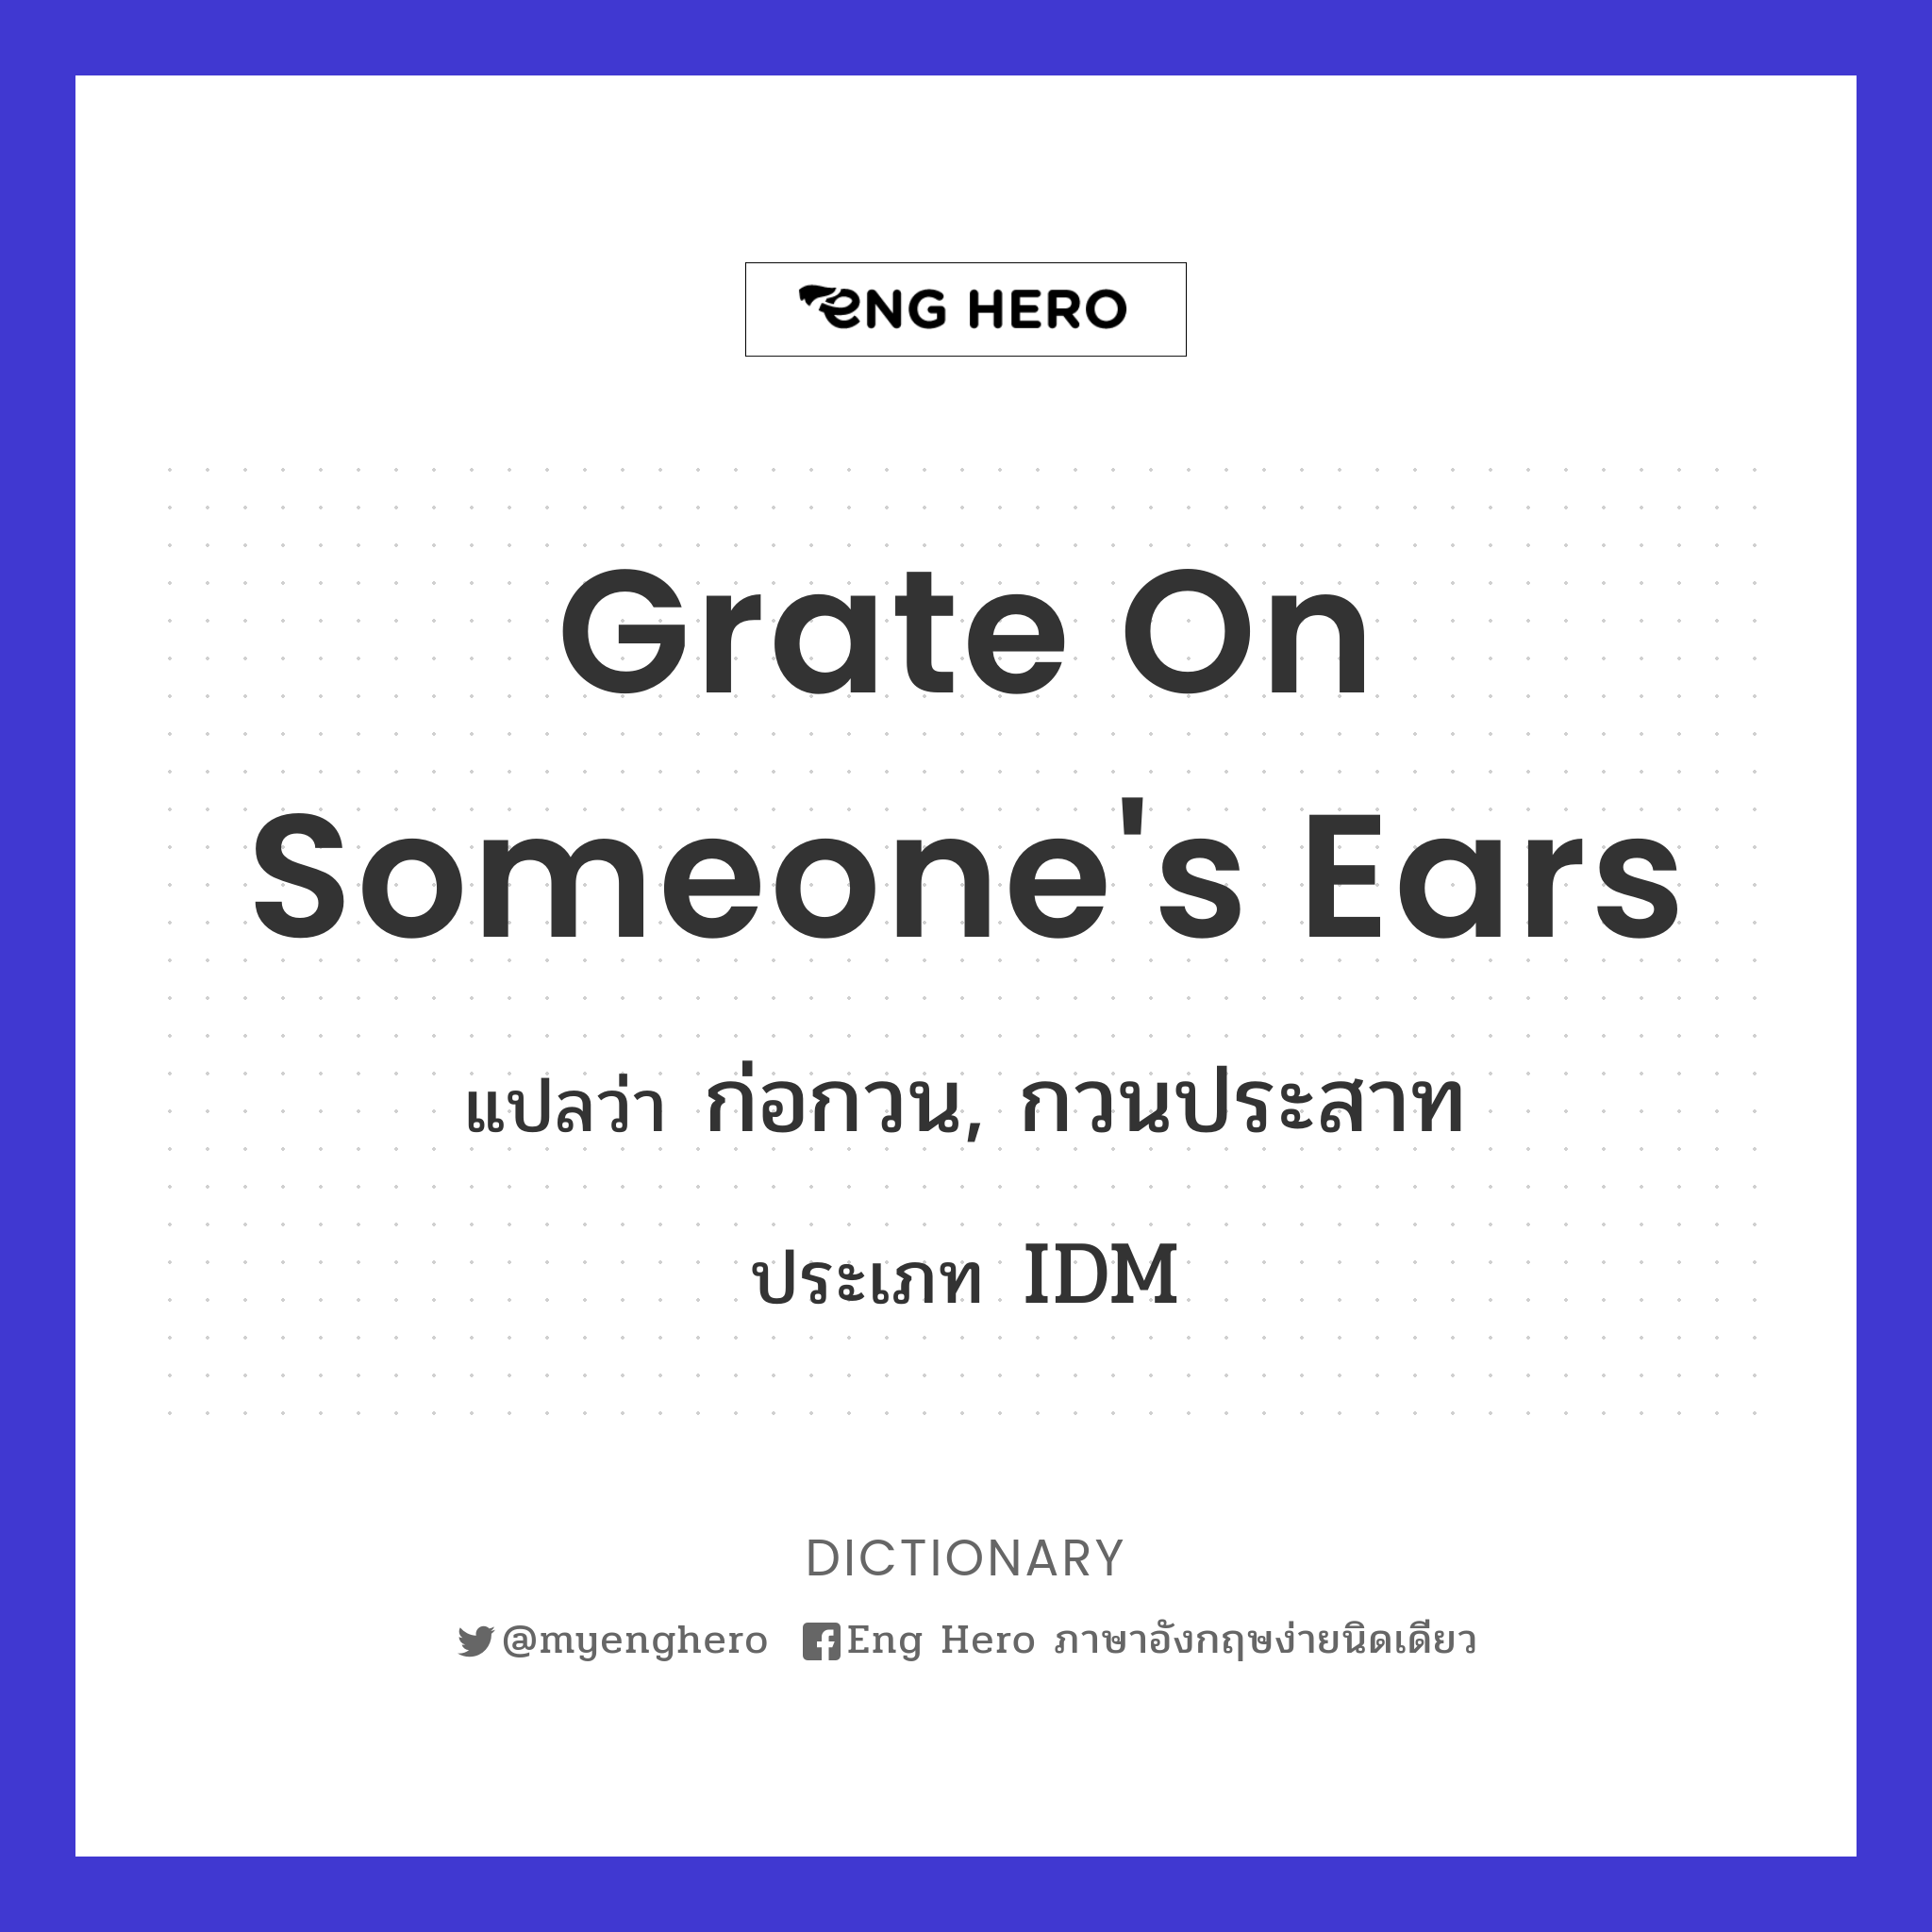 grate on someone's ears